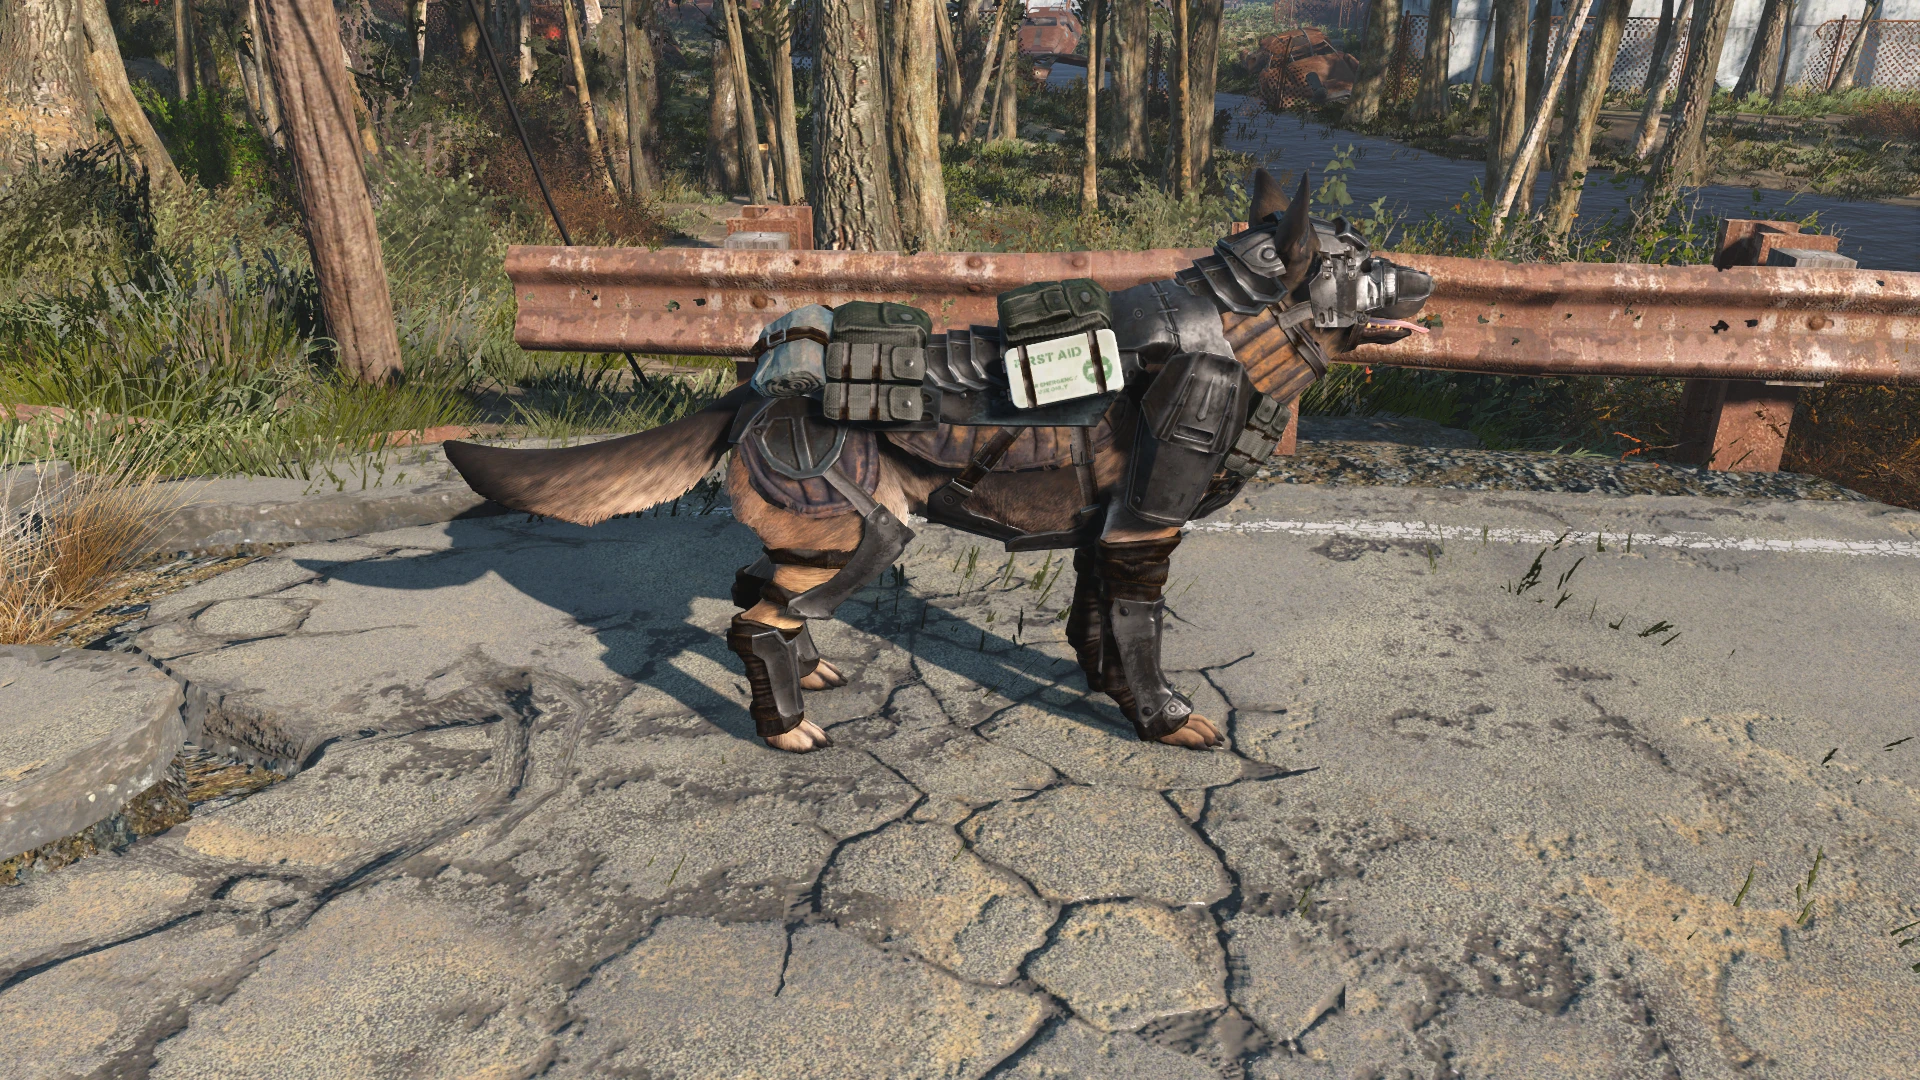 Fallout 4 Dog Armor Location : In fallout 4 you can equip your